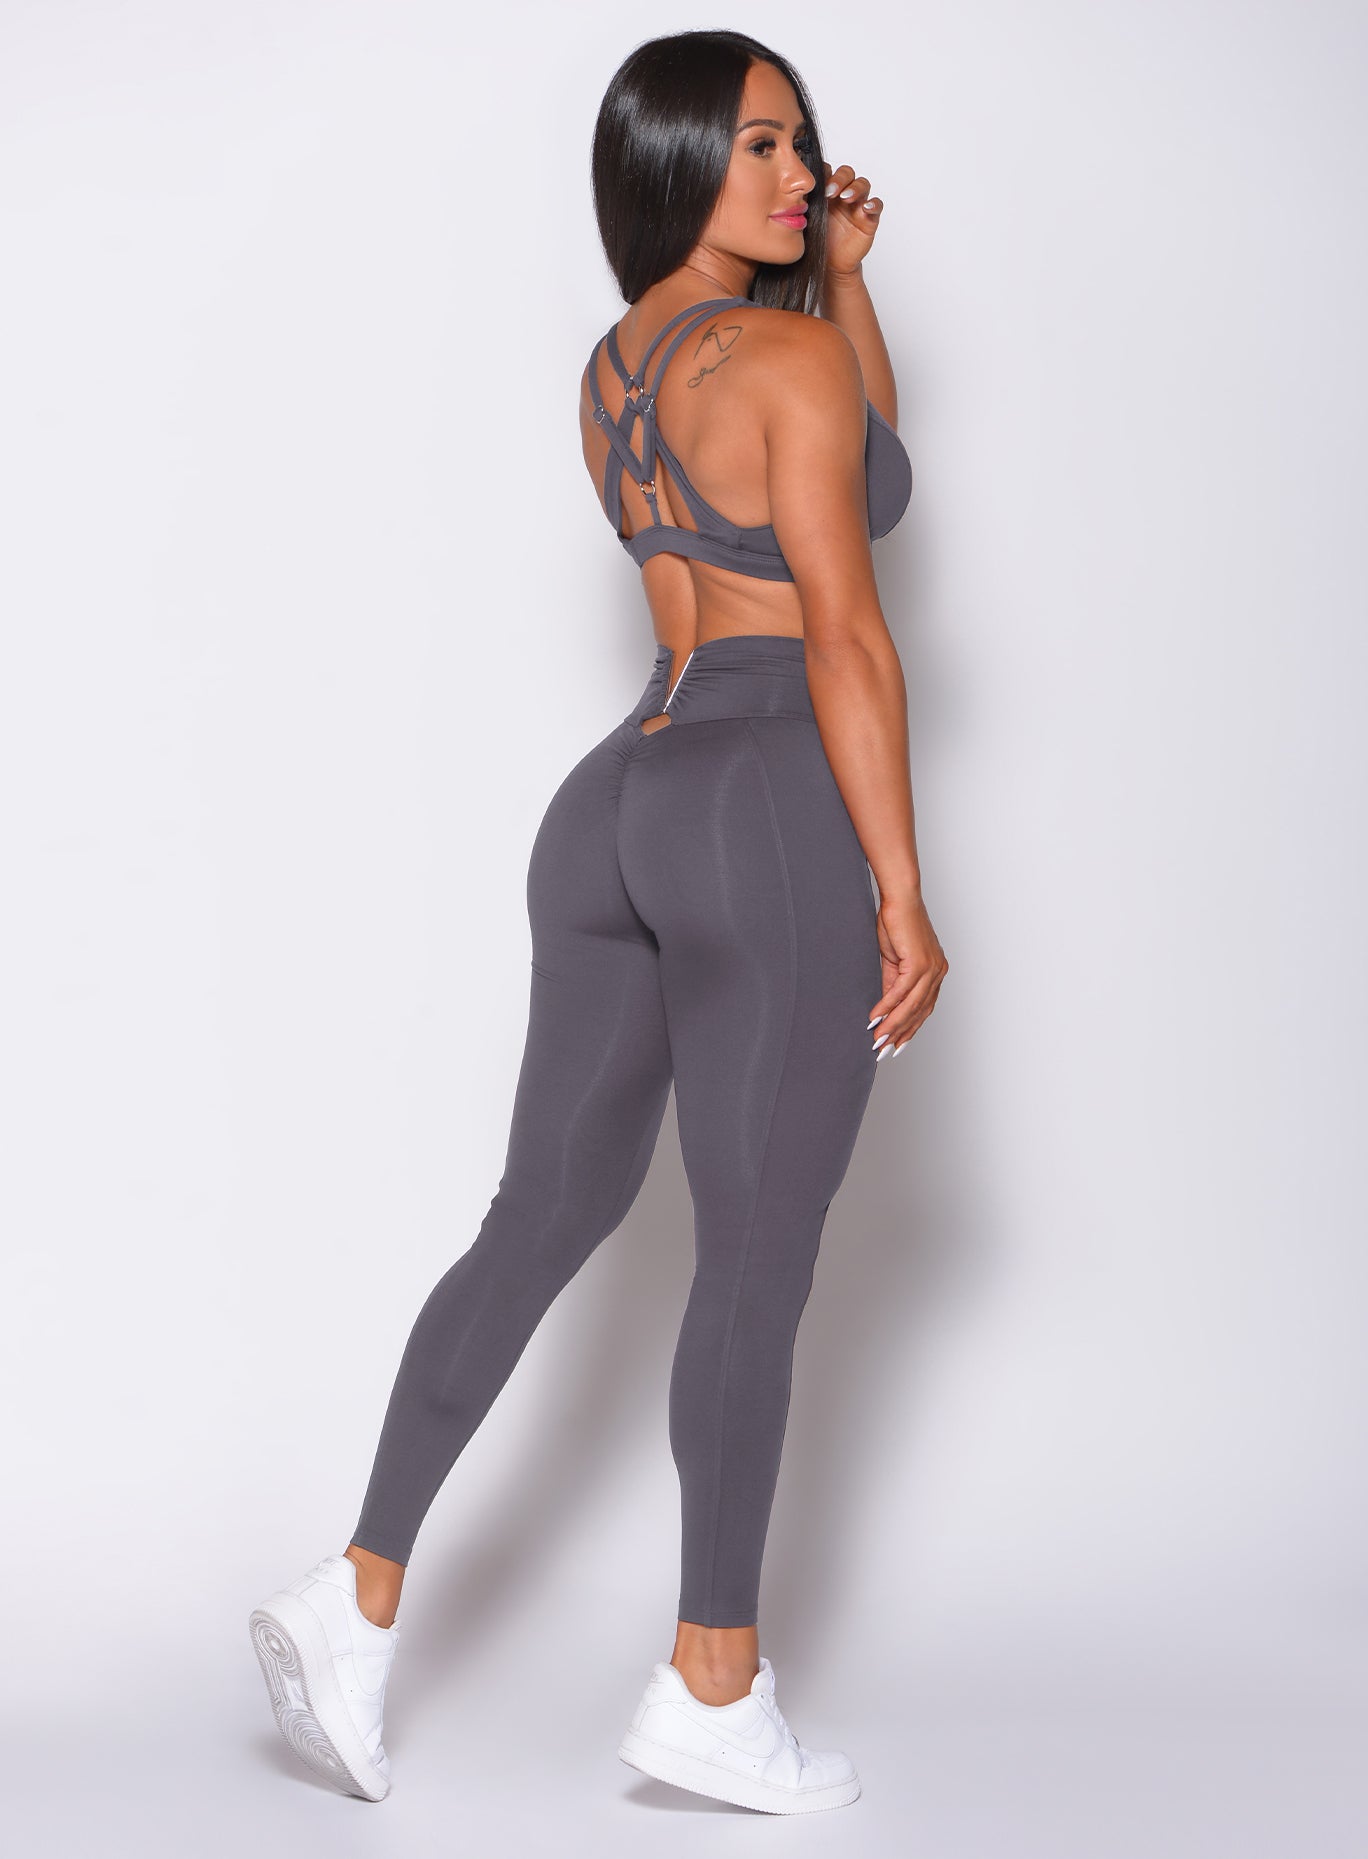 Back profile view of a model wearing our victory scrunch leggings in shadow color and a matching sports bra